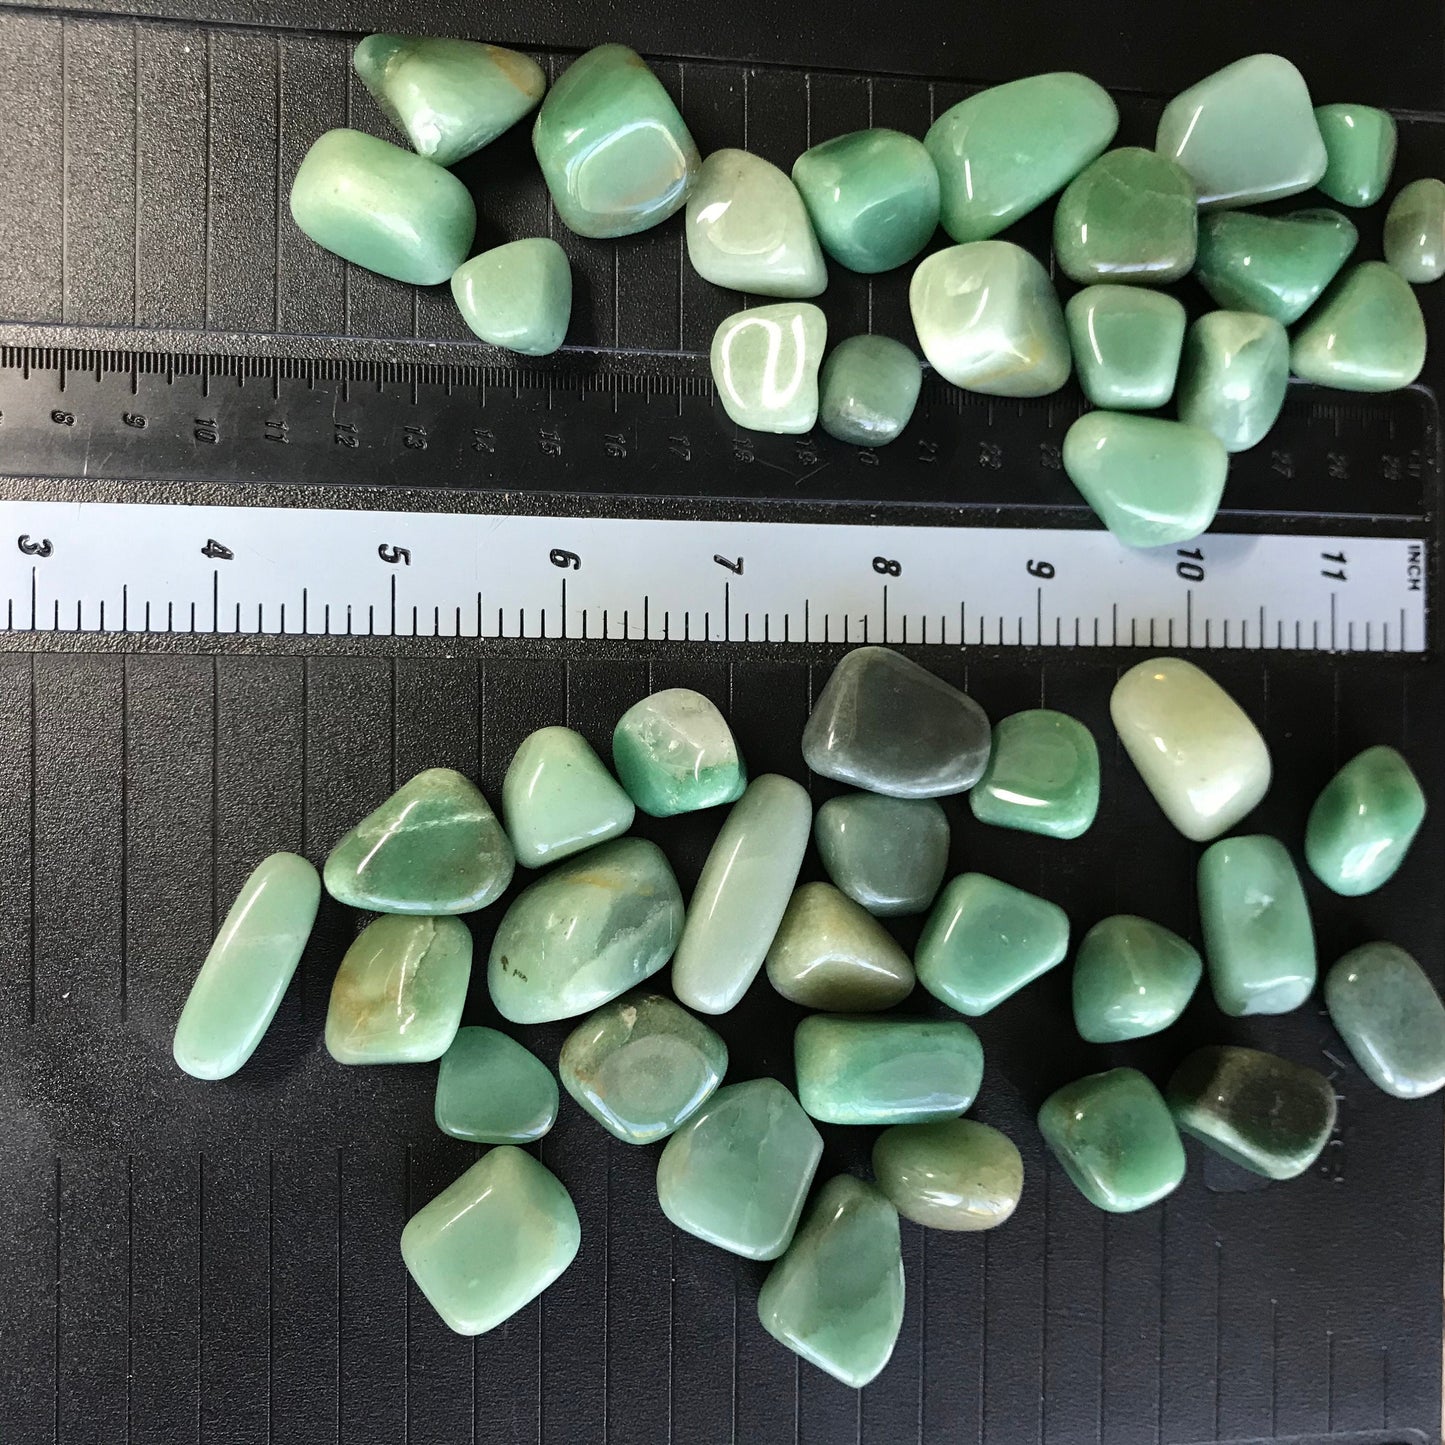 Polished Green Aventurine, Tumbled Stone (Approx. 3/4" - 1 1/4" long) for Wire Wrapping or Crystal Grid Supply 1448